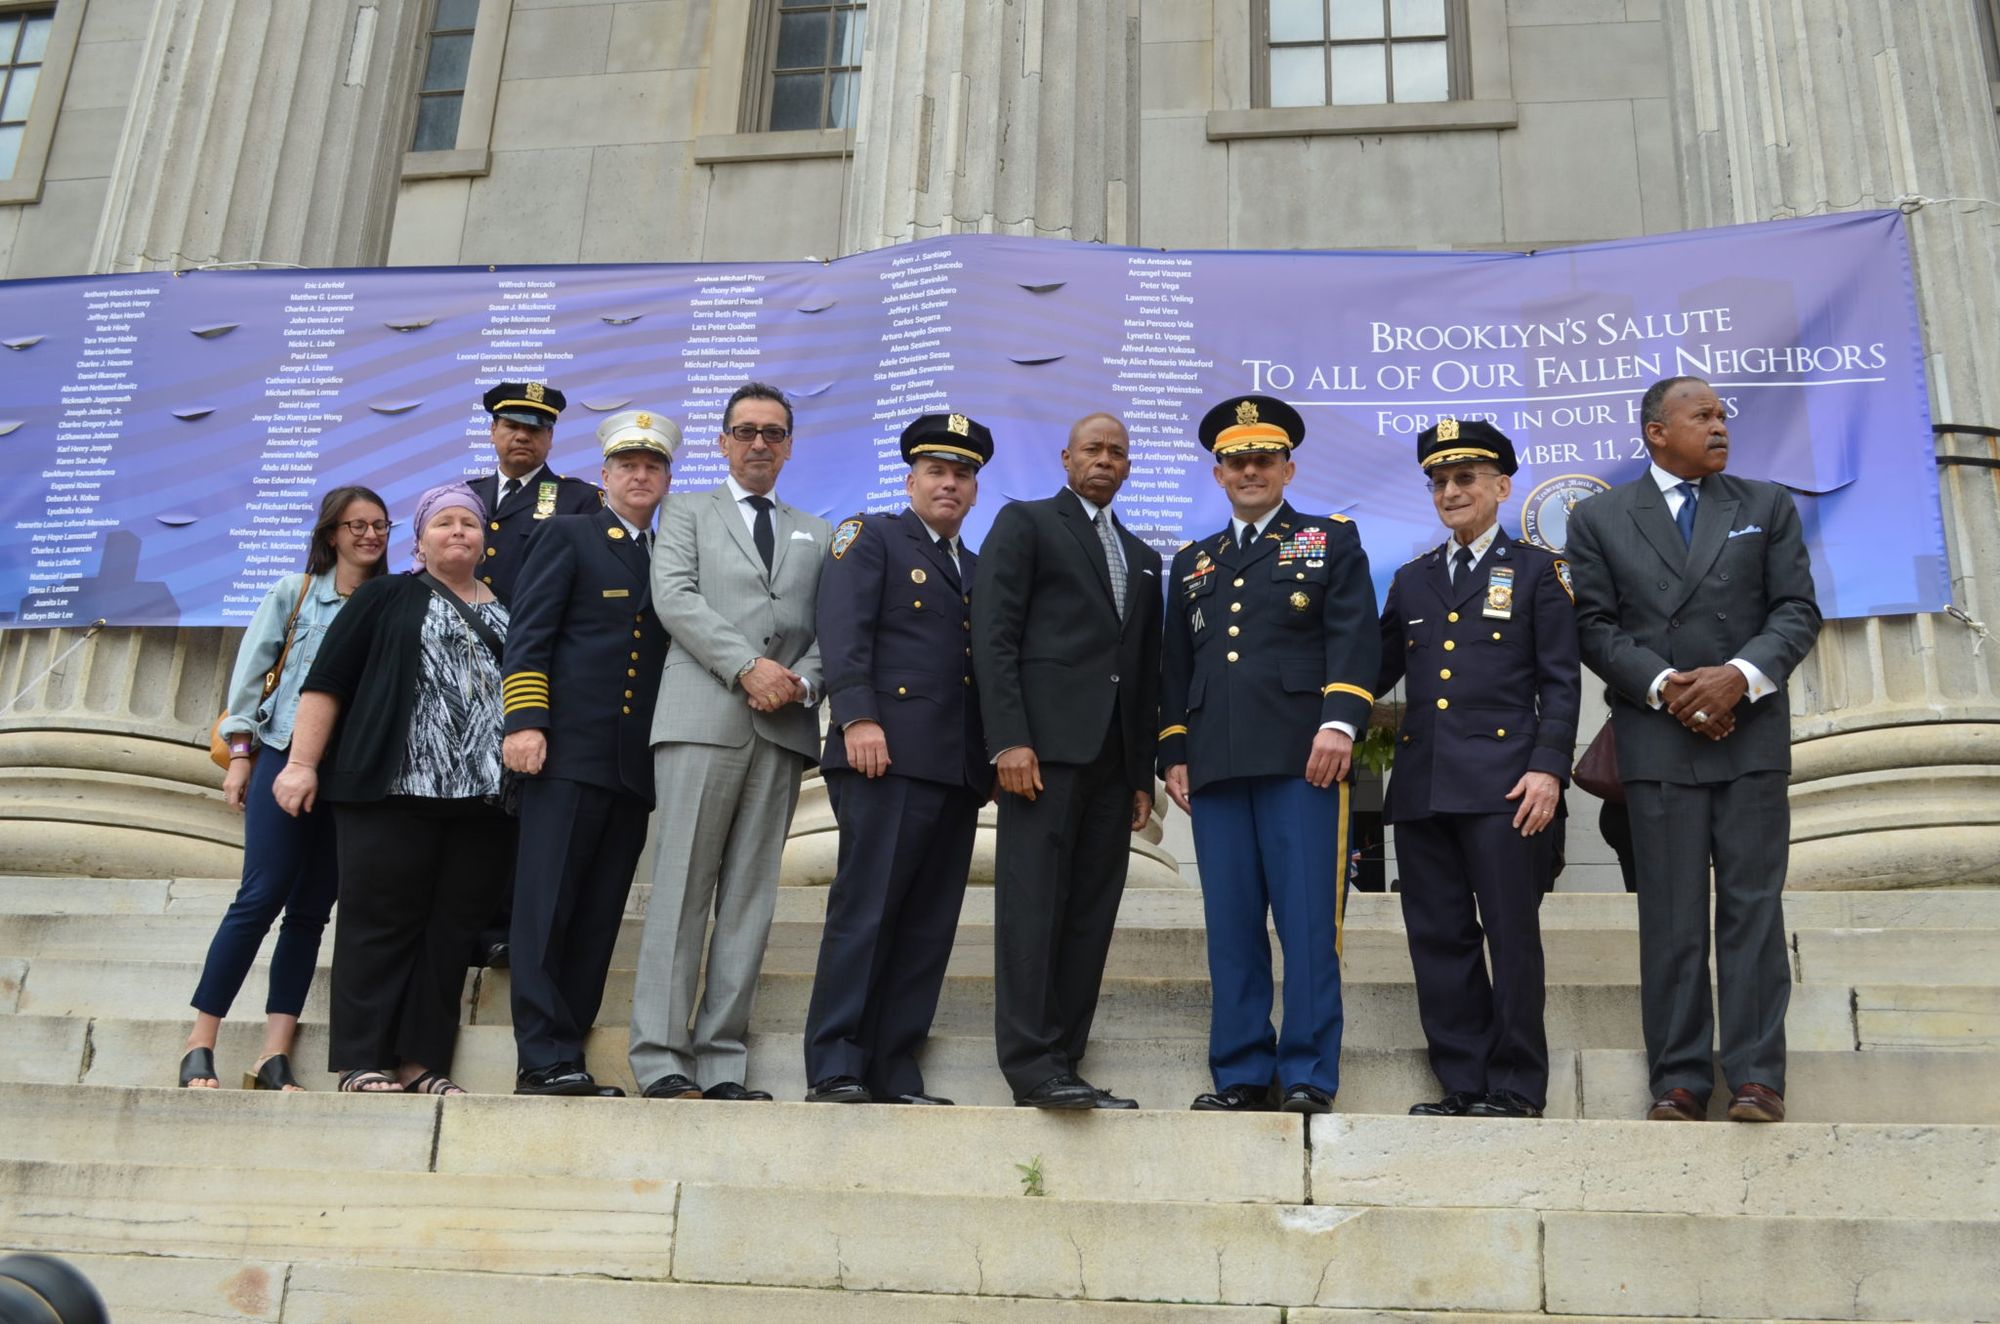 Borough President Unveils Memorial Honoring The 266 Brooklyn Residents Lost On 9/11